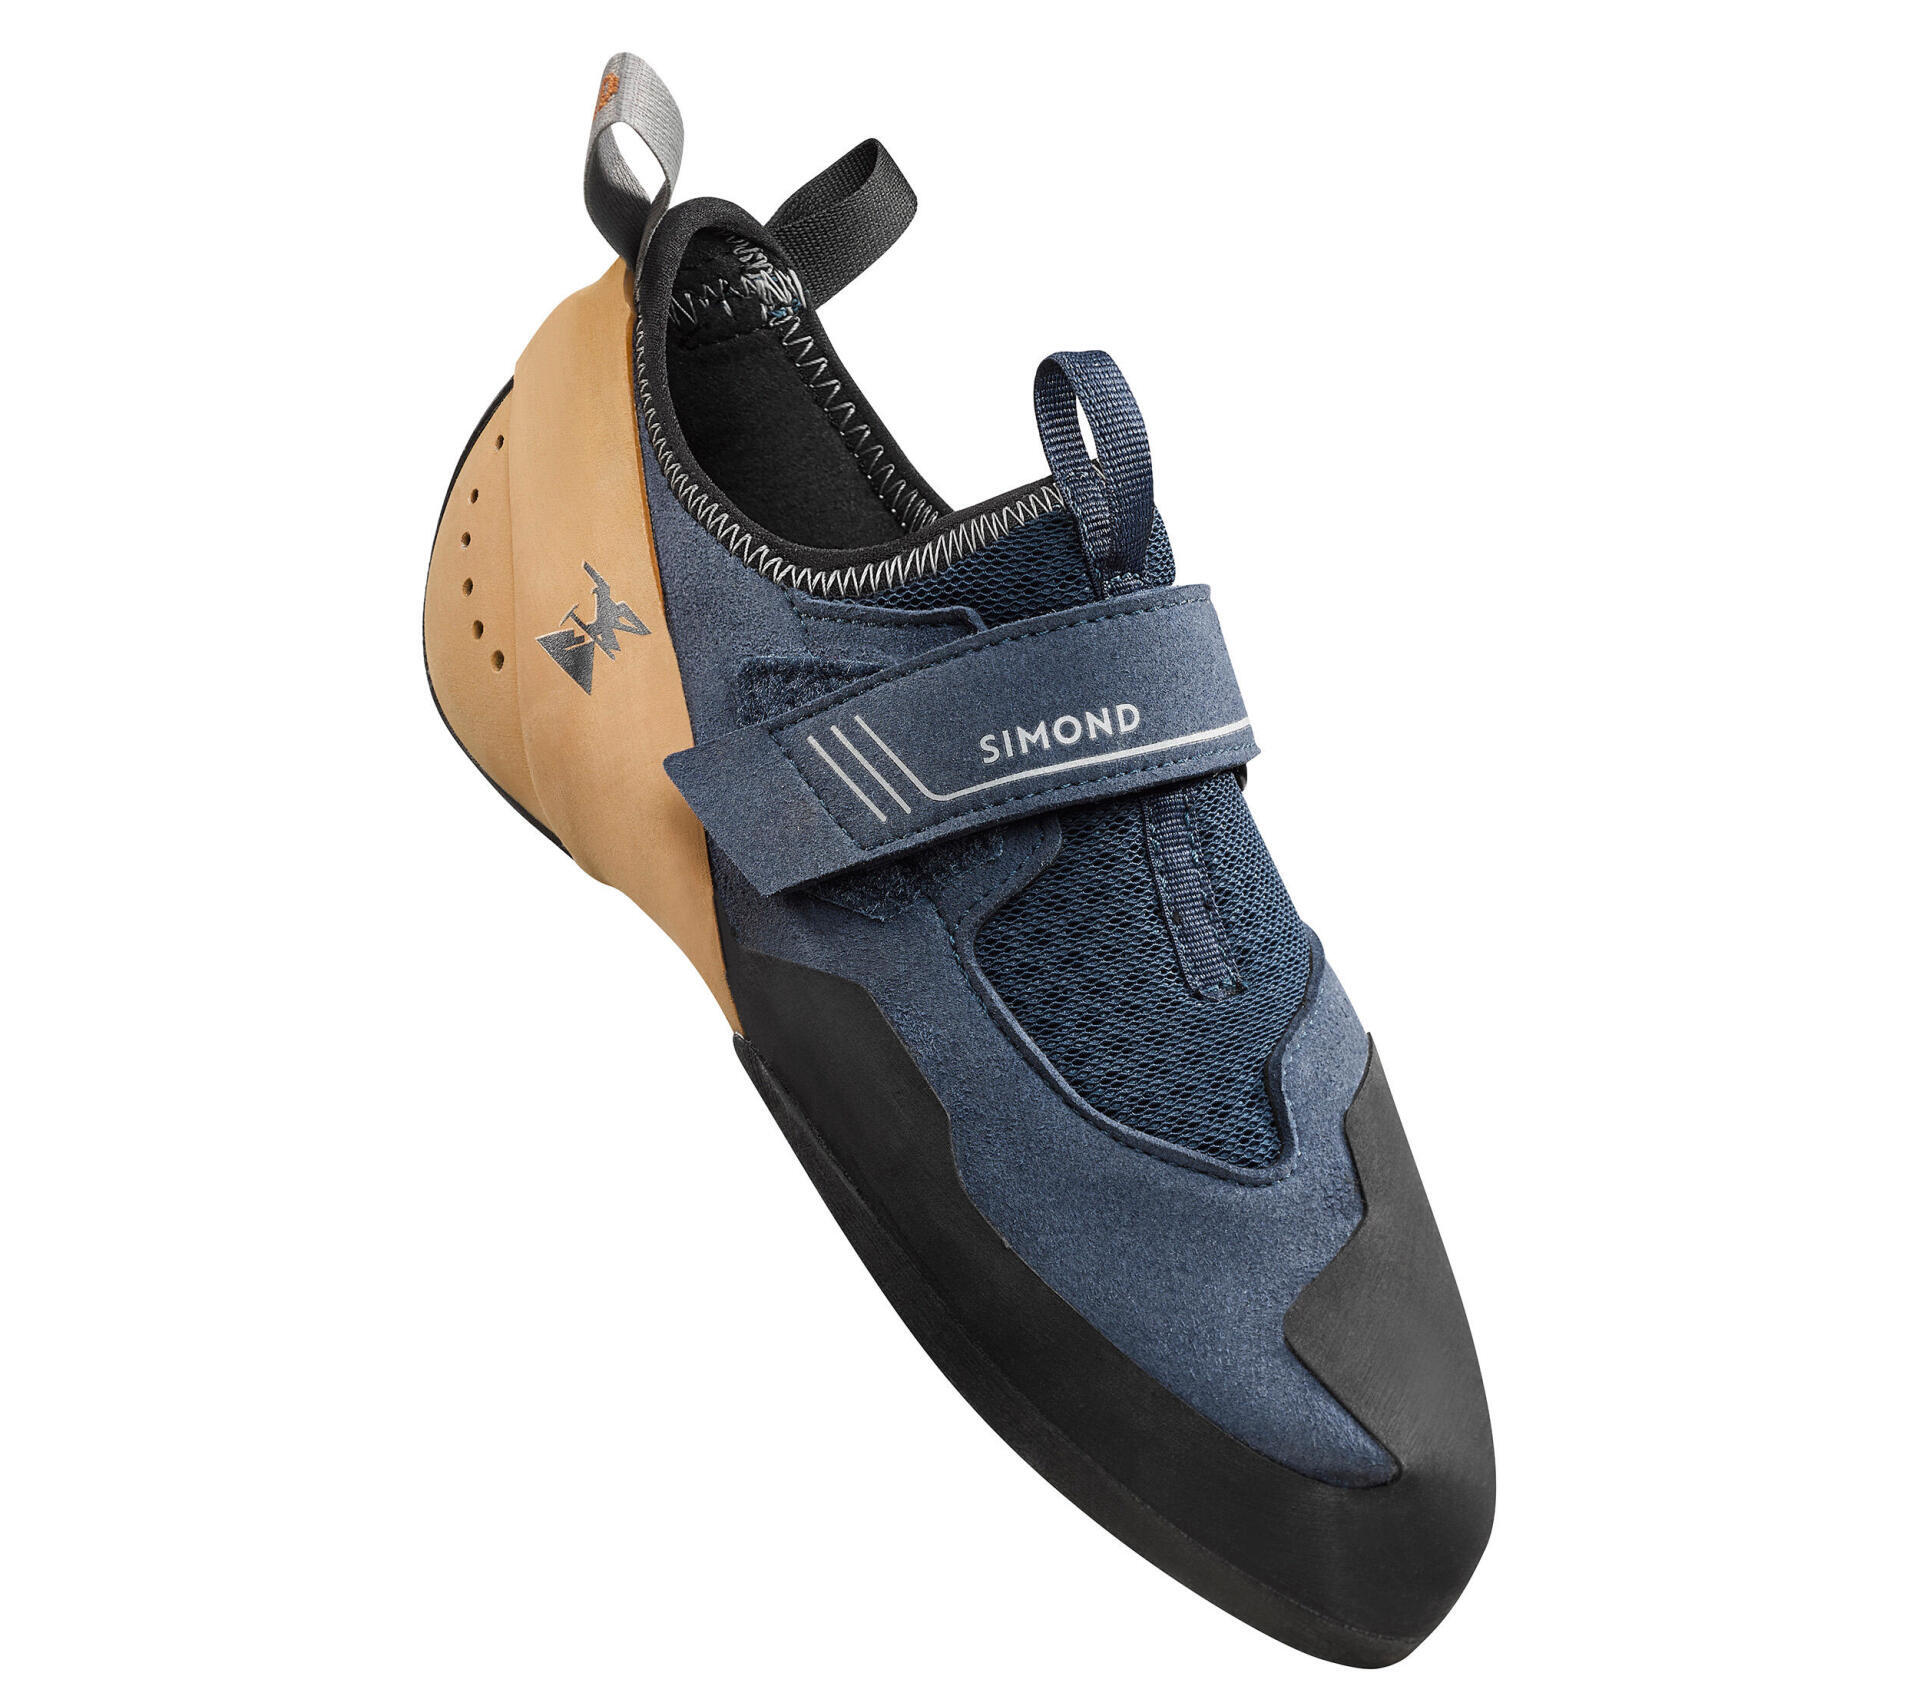 Vertika our new climbing shoes for all feet